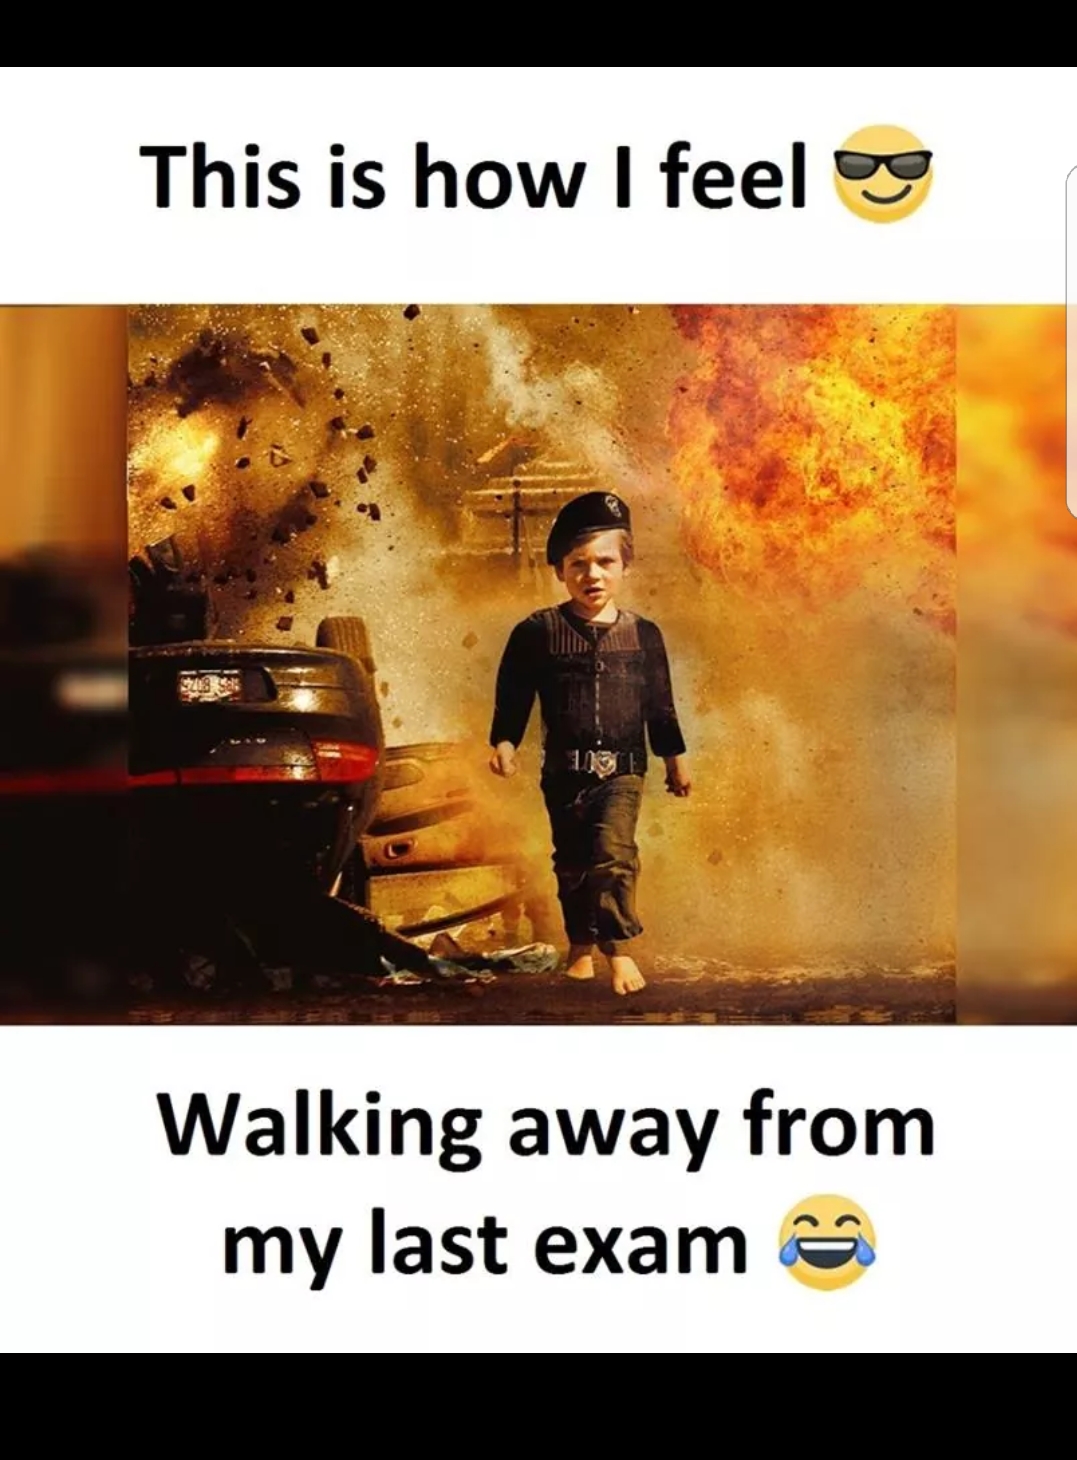 When you finish your last exam... — Steemit